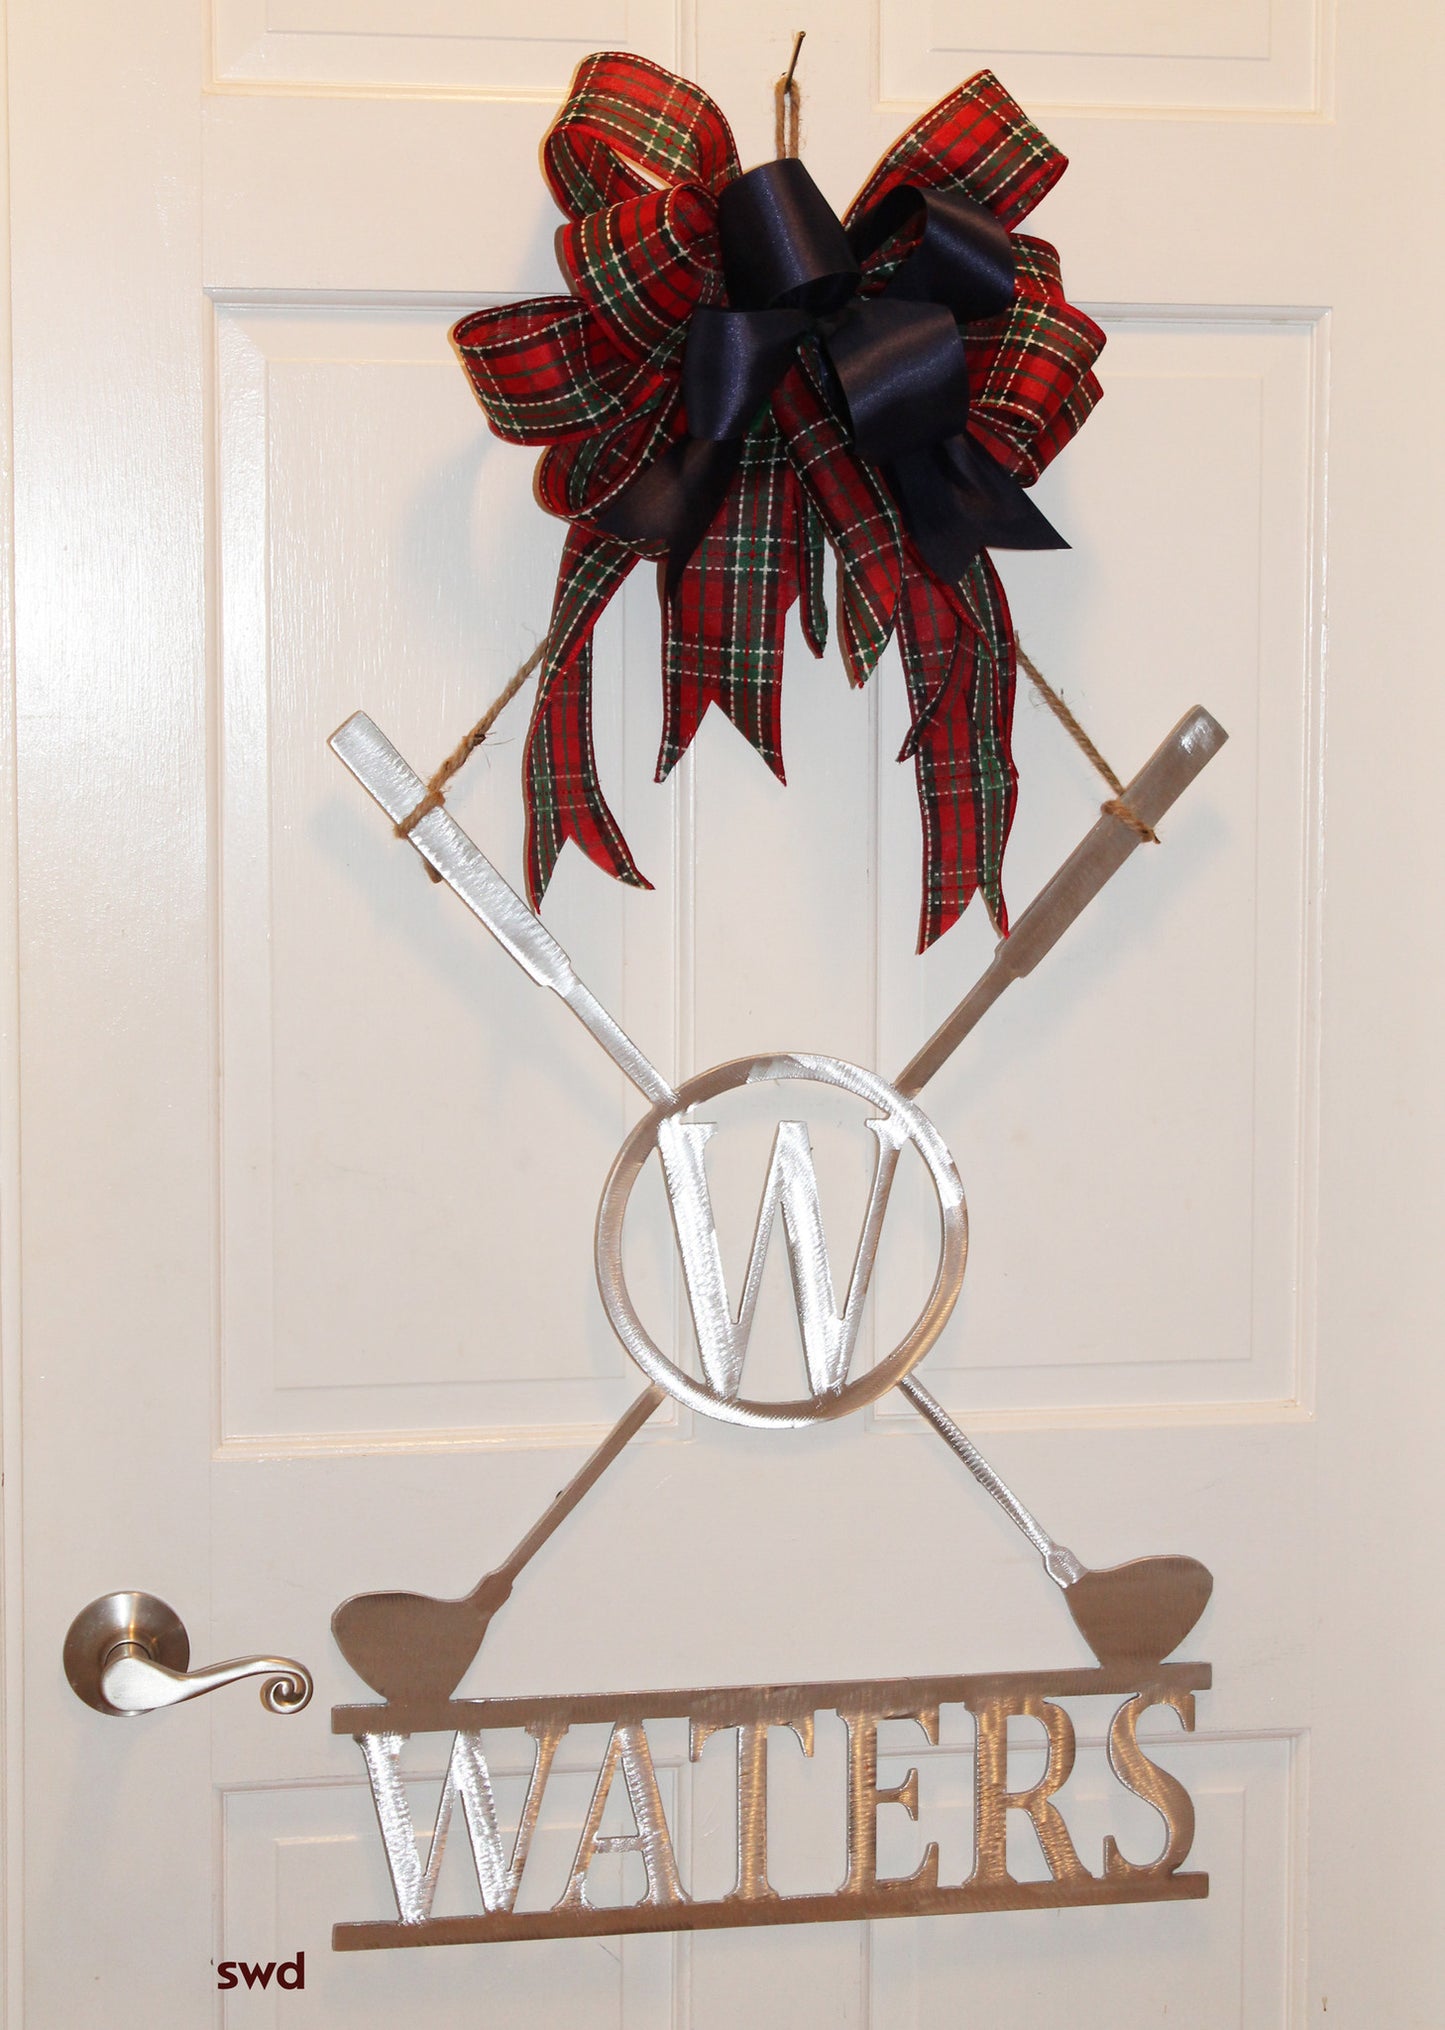 Monogrammed Golf Clubs with Family Name